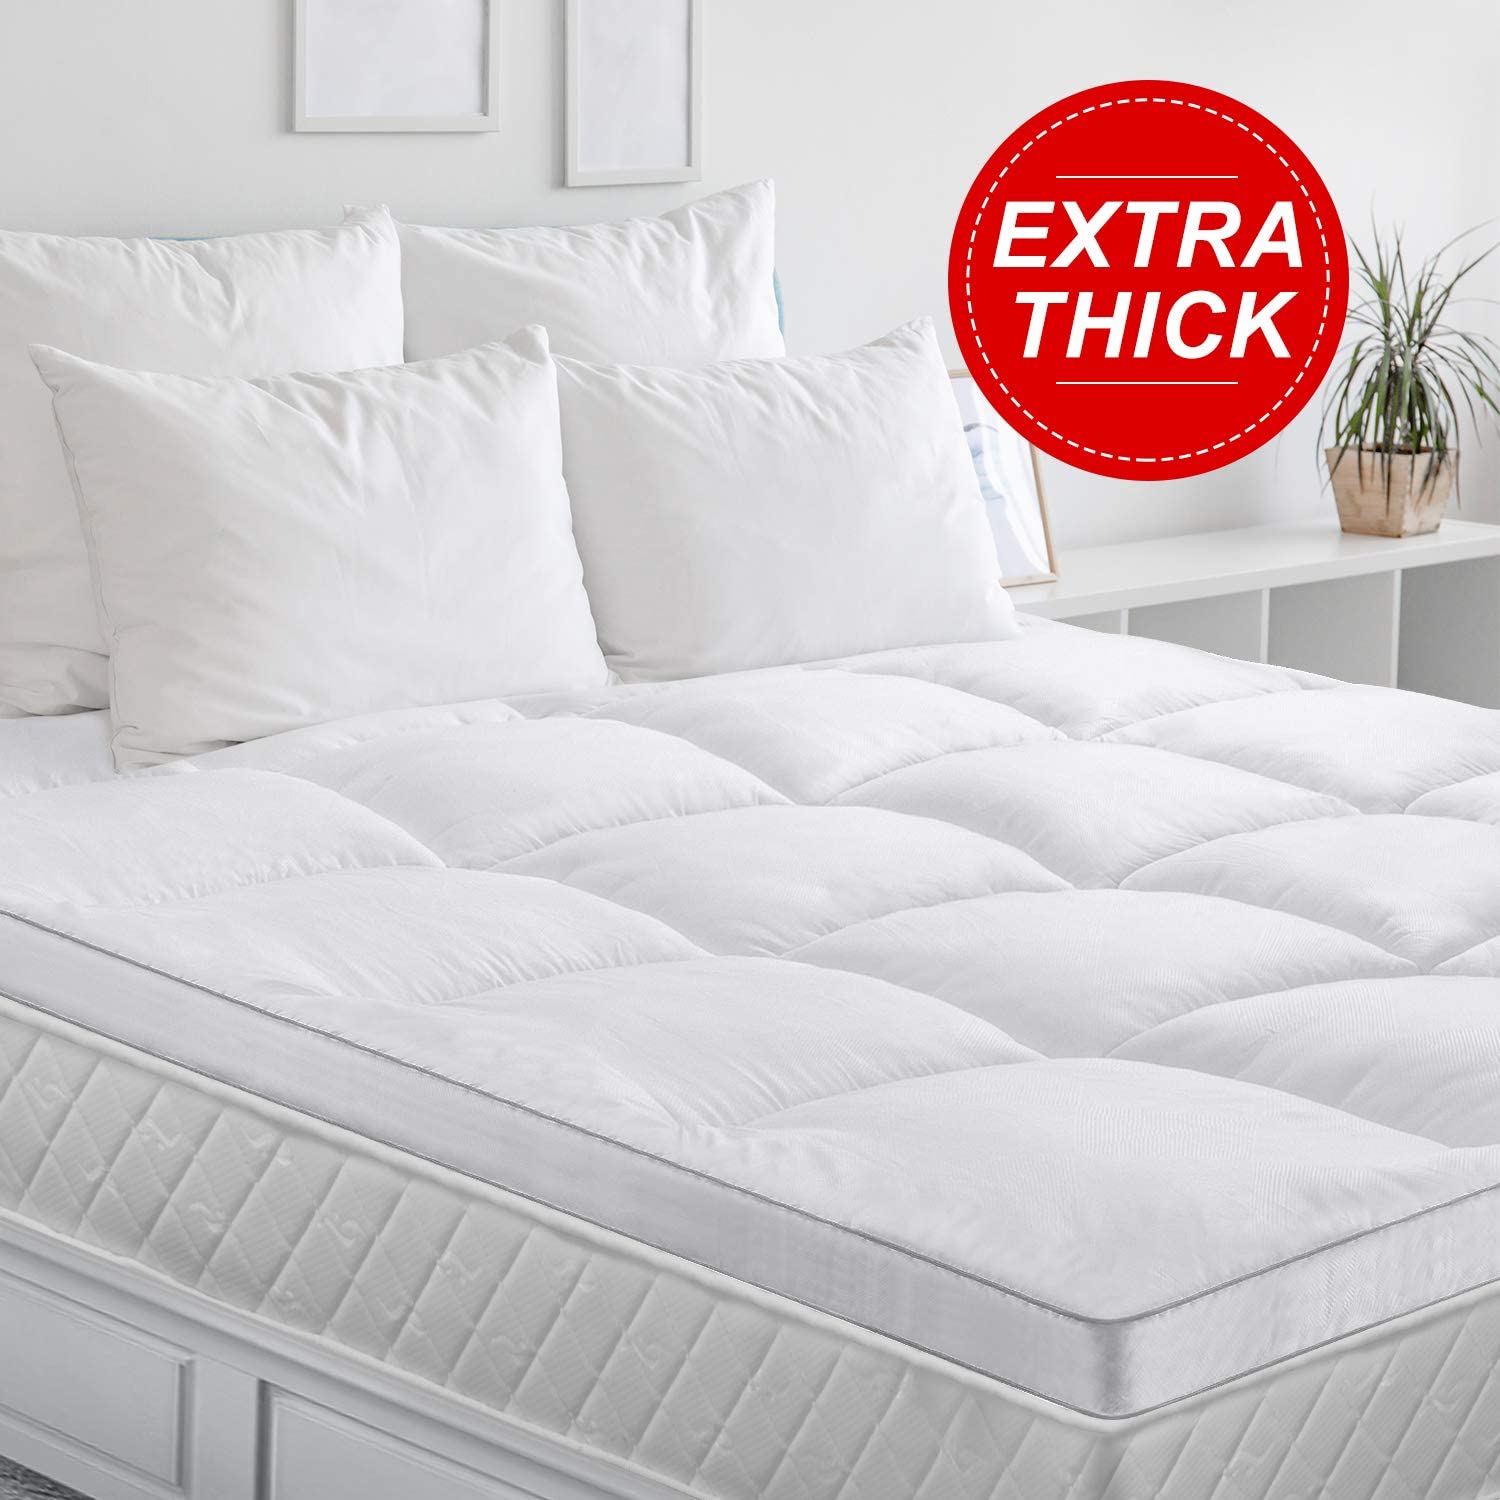 Amazon.com: BedStory Extra Thick Mattress Topper 2.5inch ...